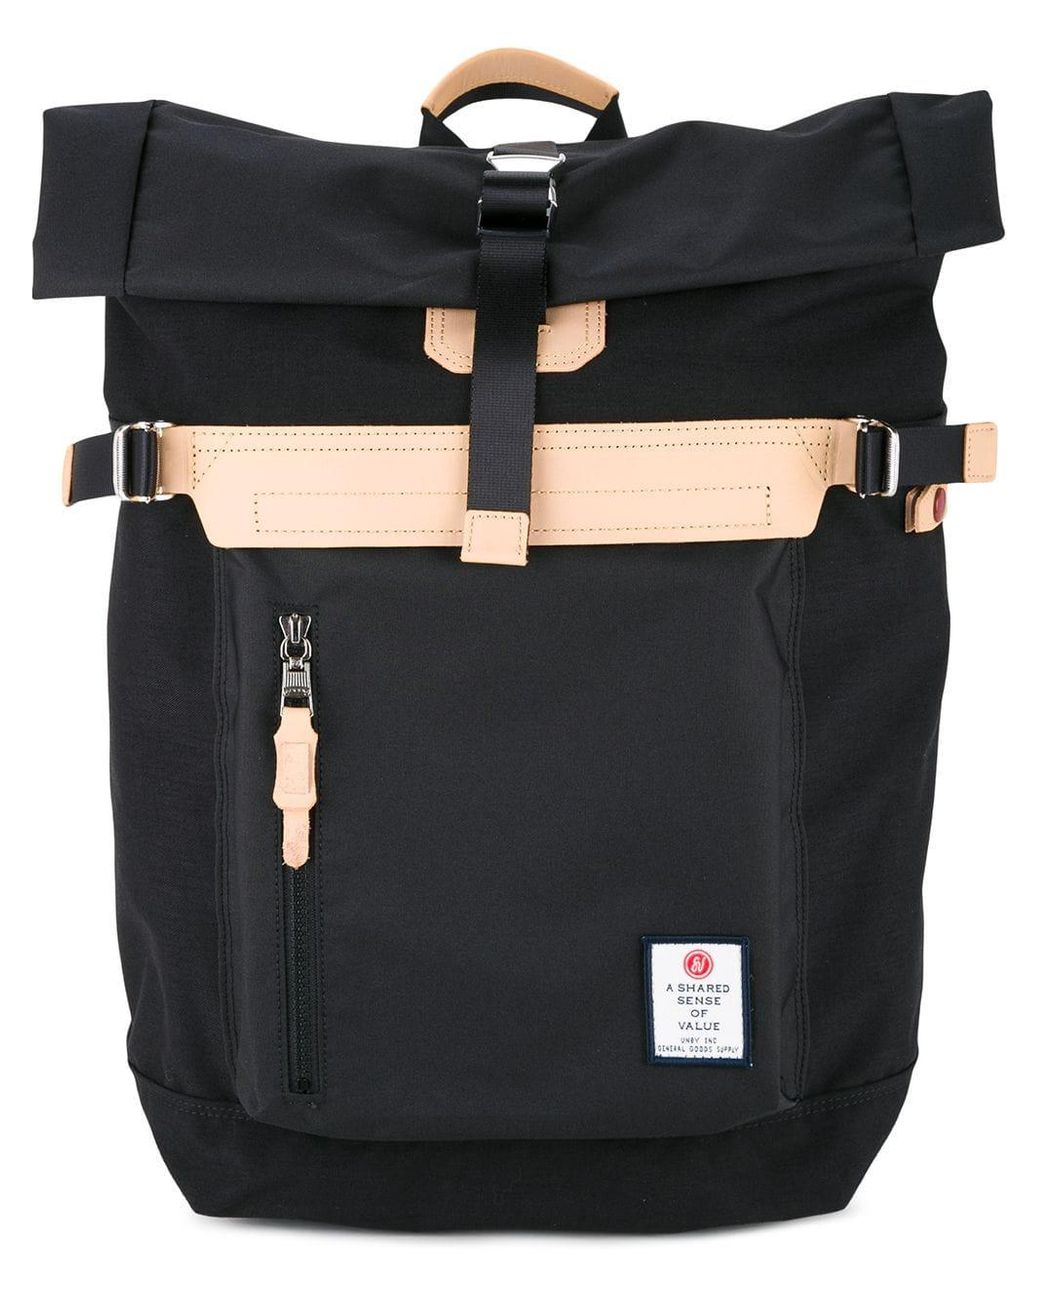 AS2OV Synthetic Folded Top Buckle Backpack in Black for Men - Lyst